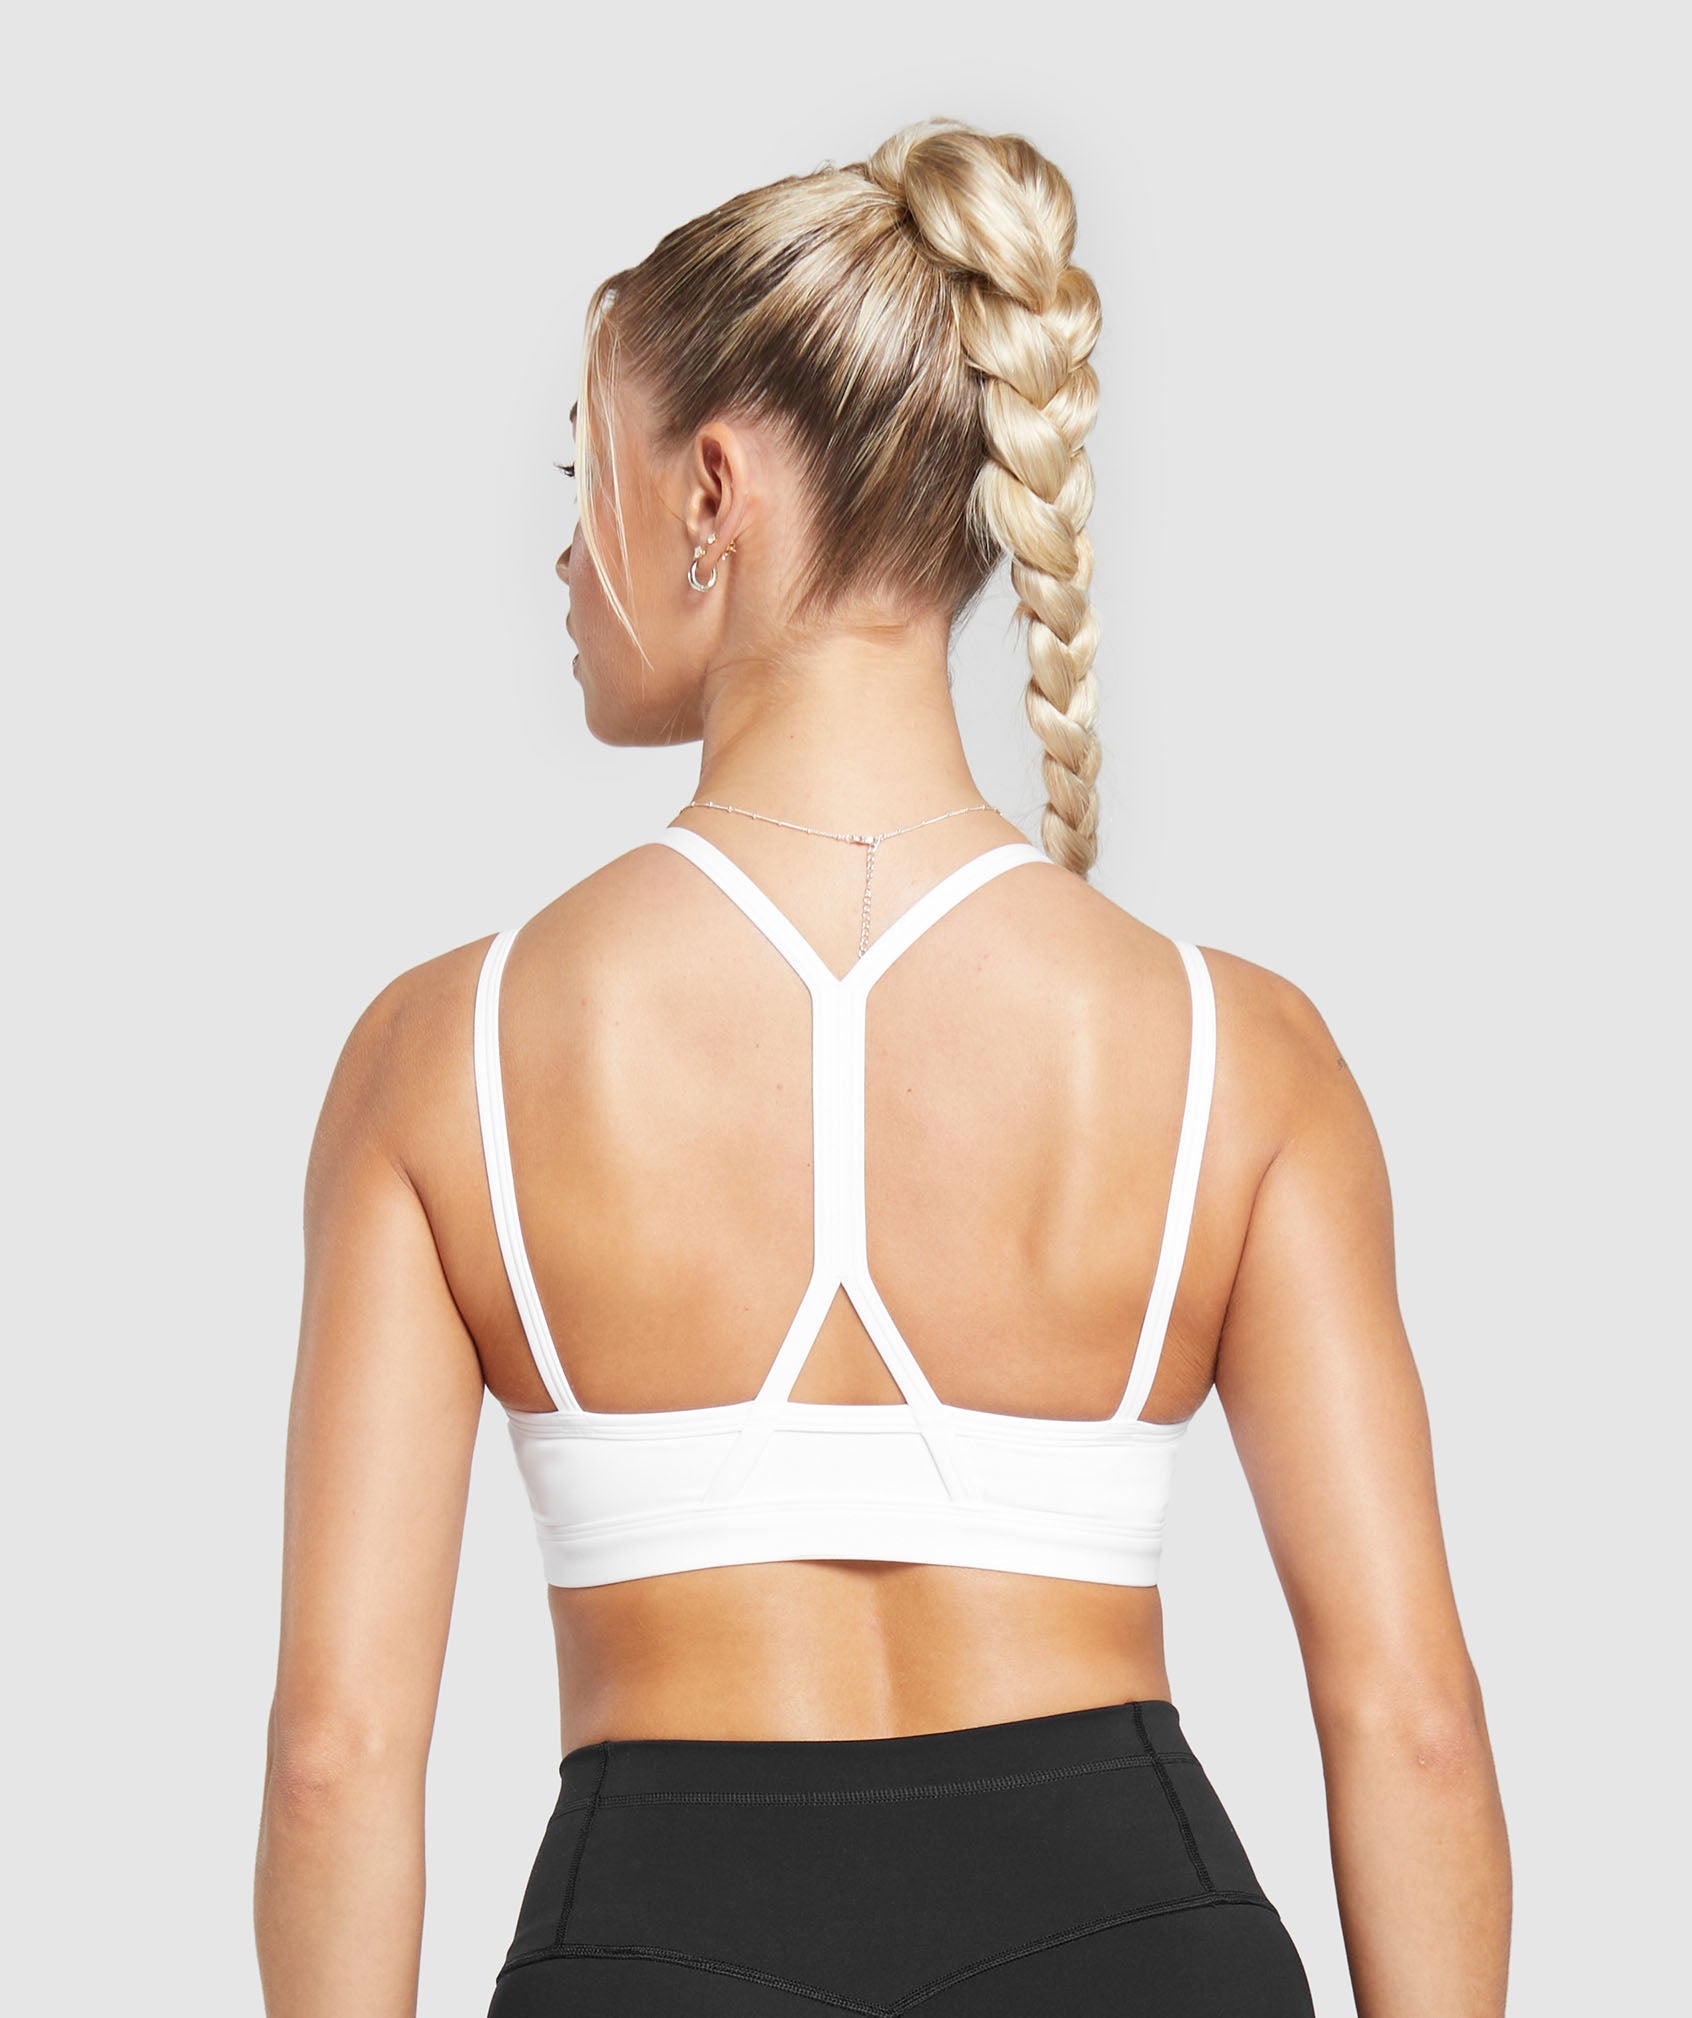 How to nab Gymshark sports bras, shorts and leggings for less than